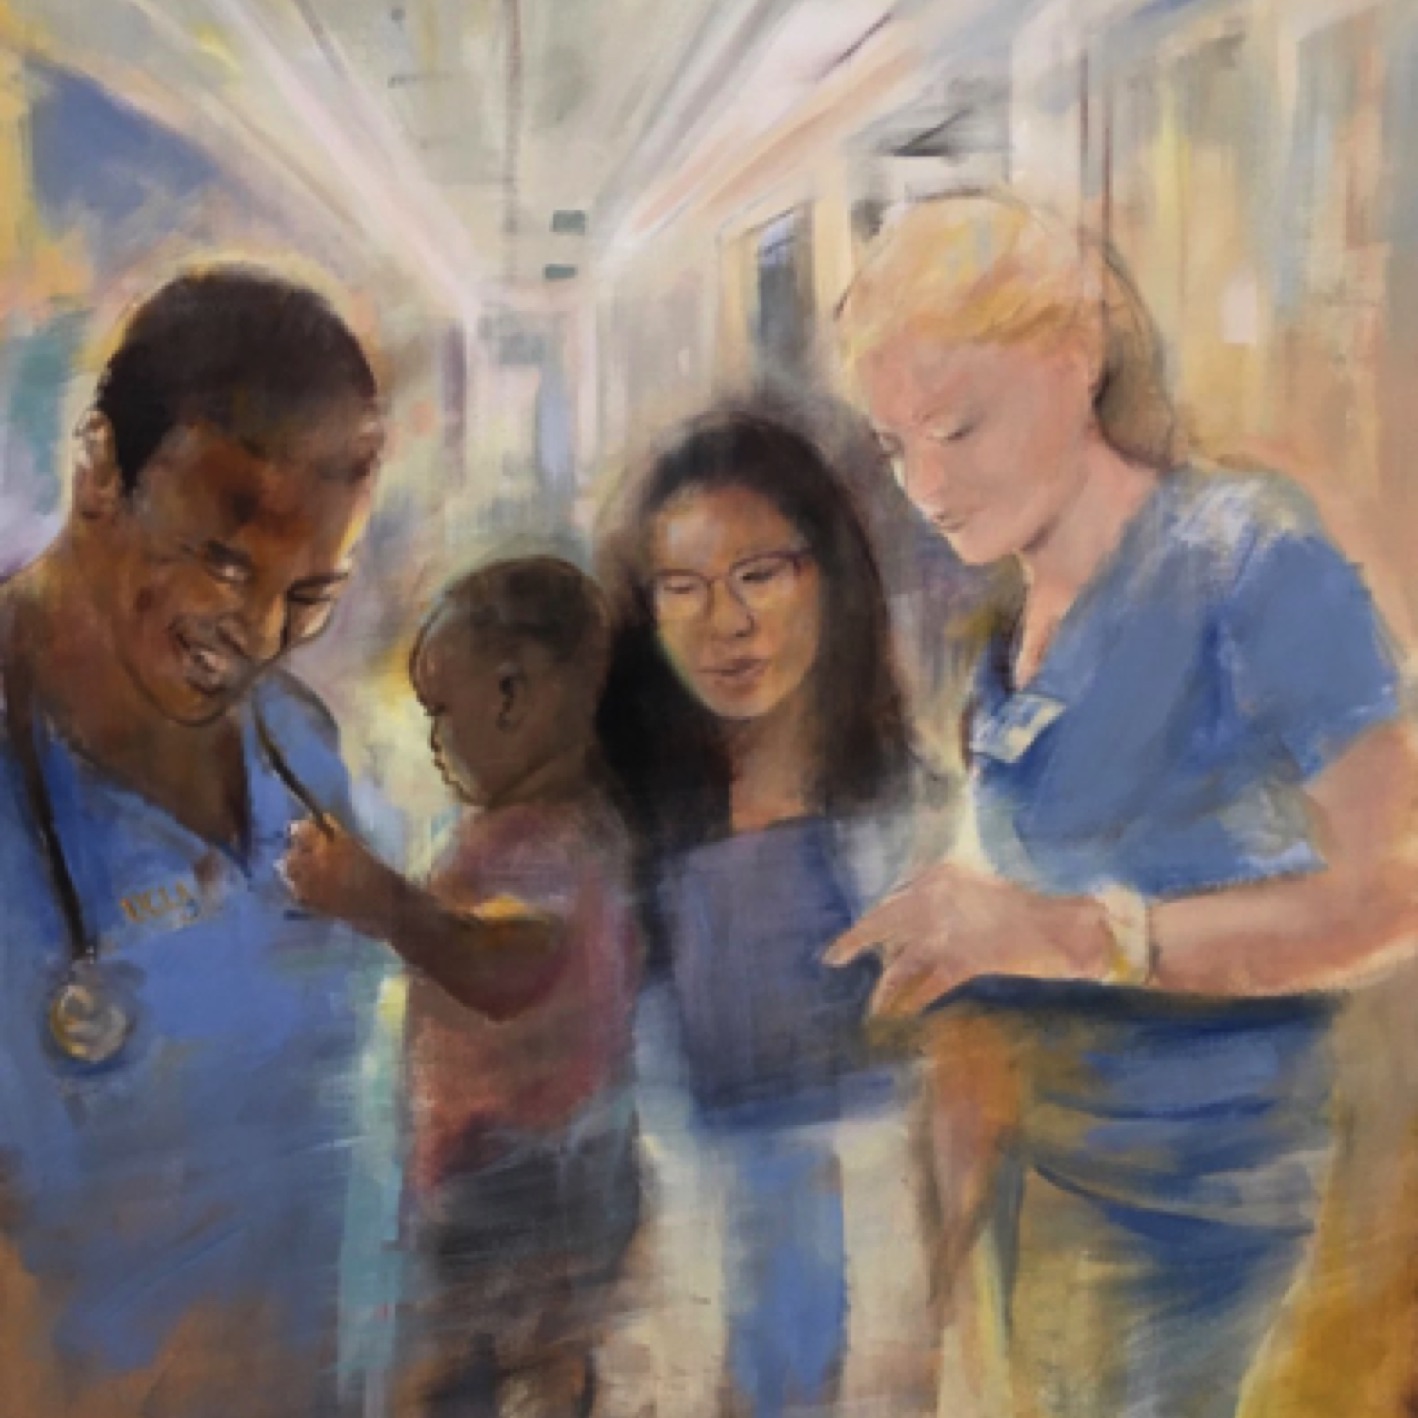 Gregg Chadwick
The Art and Science of Nursing
60”x48” oil on linen 2019
UCLA School of Nursing Collection